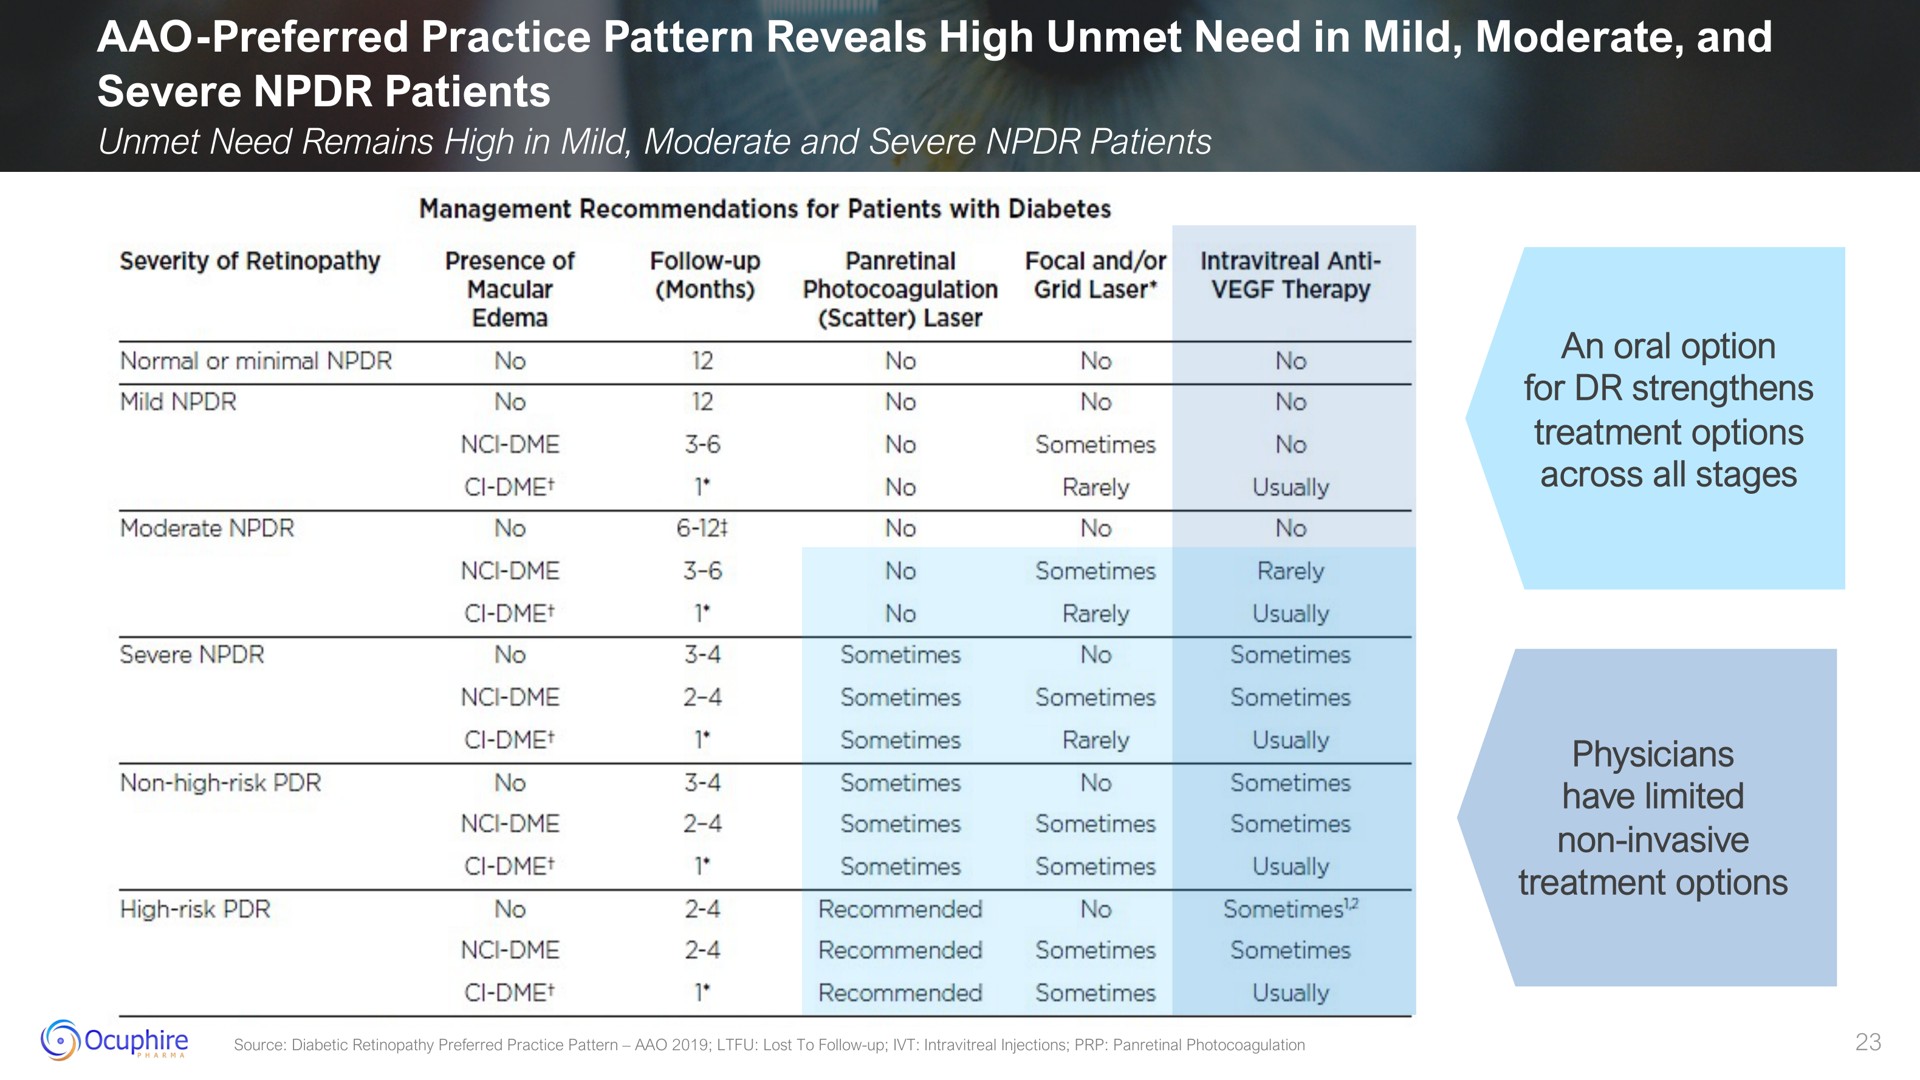 preferred practice pattern reveals high unmet need in mild moderate and severe patients normal or minimal no no no no no sometimes rarely an oral option treatment options across all stages no no usually | Ocuphire Pharma